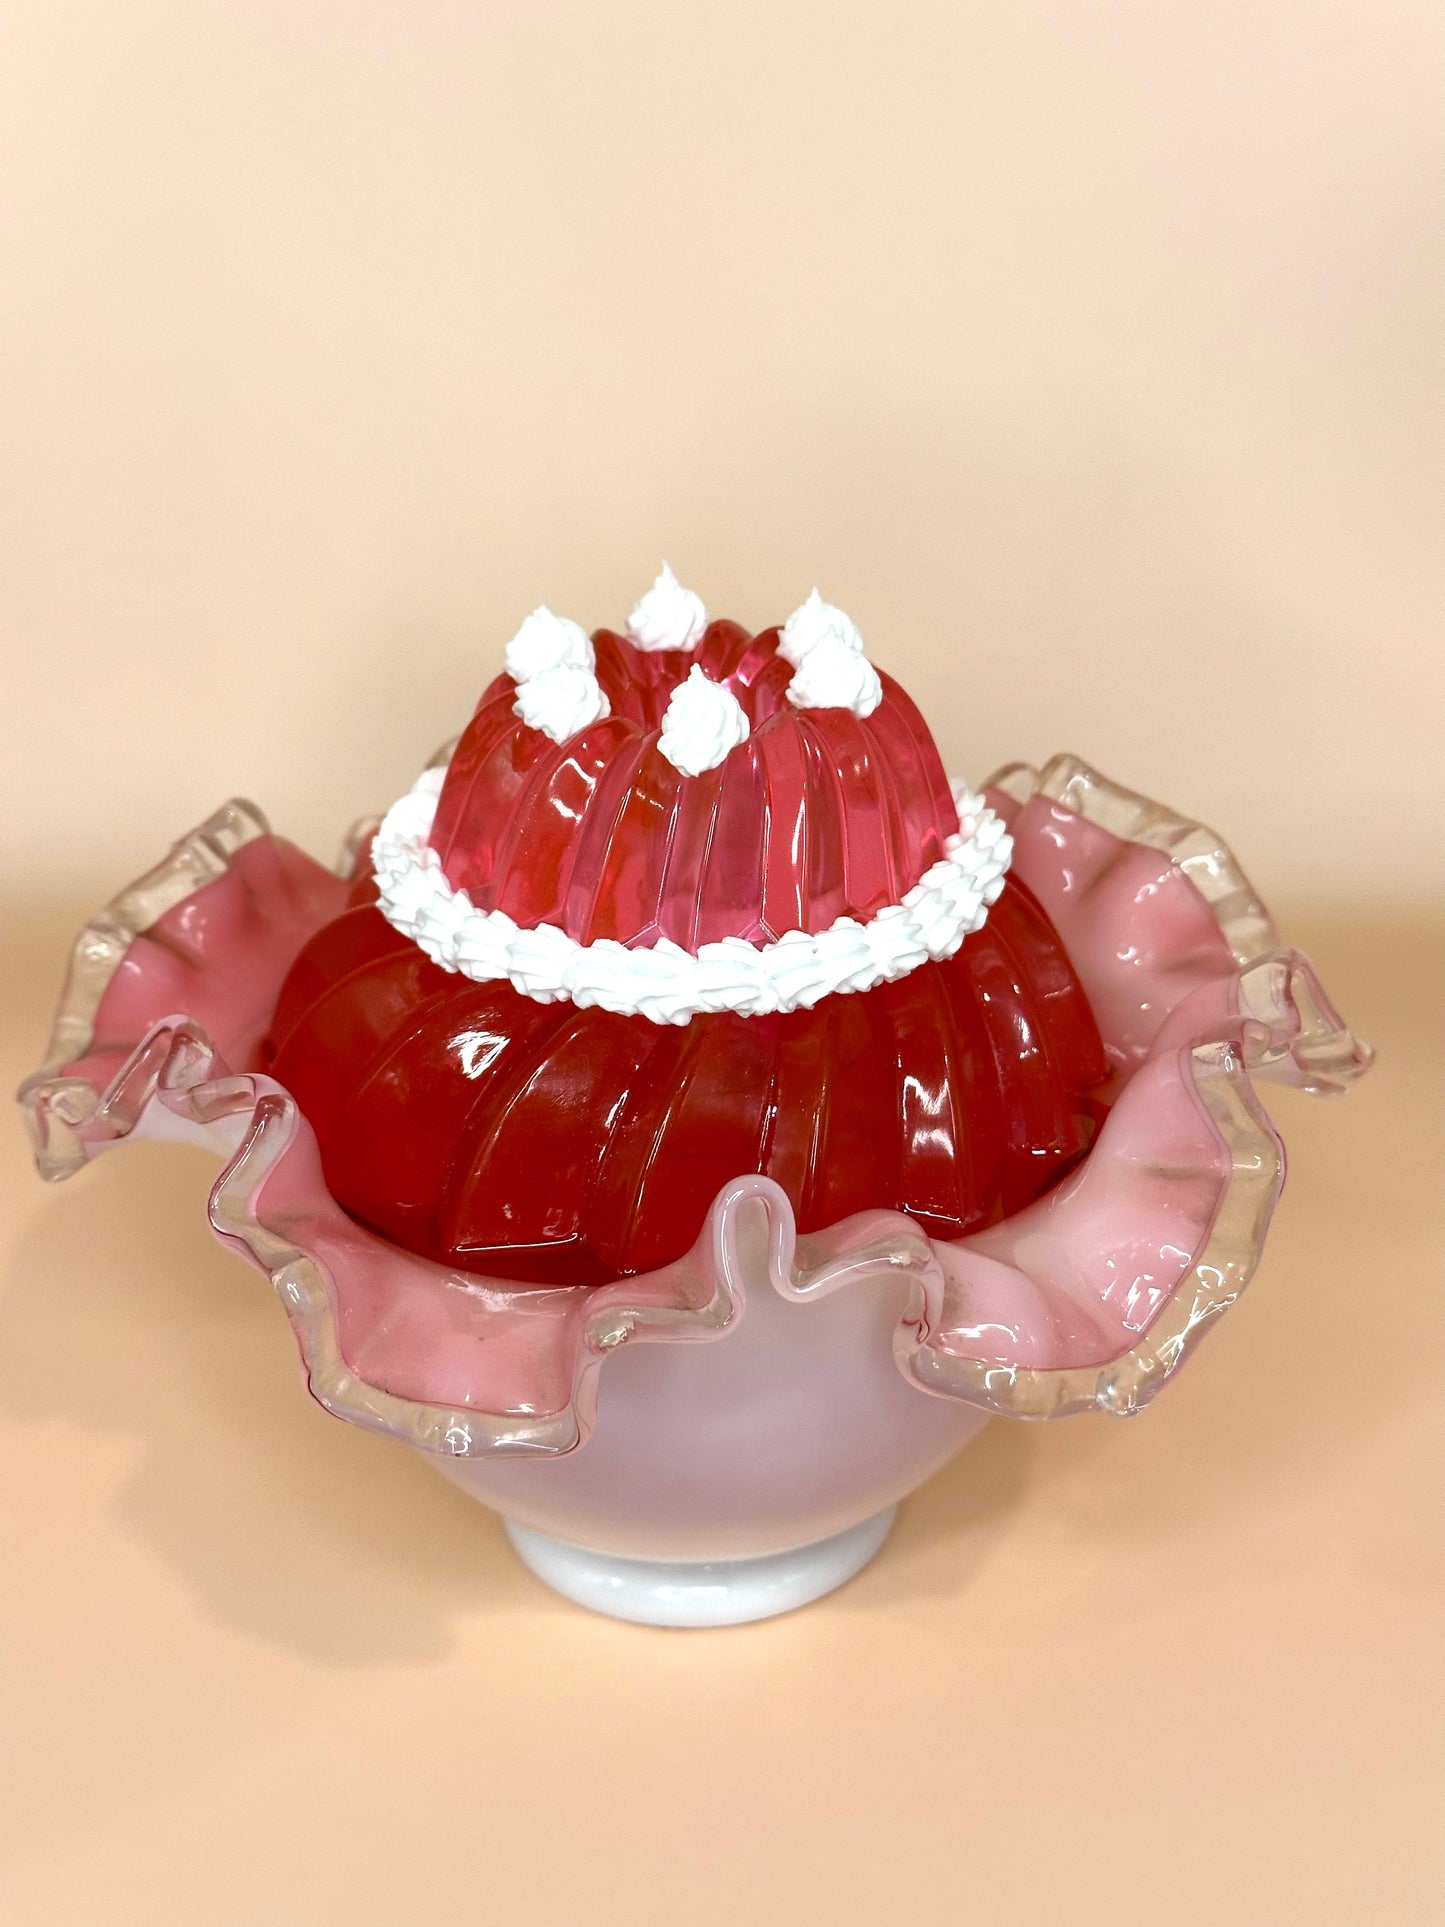 Vintage Pink Frilly Glass Dish with Red Jello Mold and Whip Cream